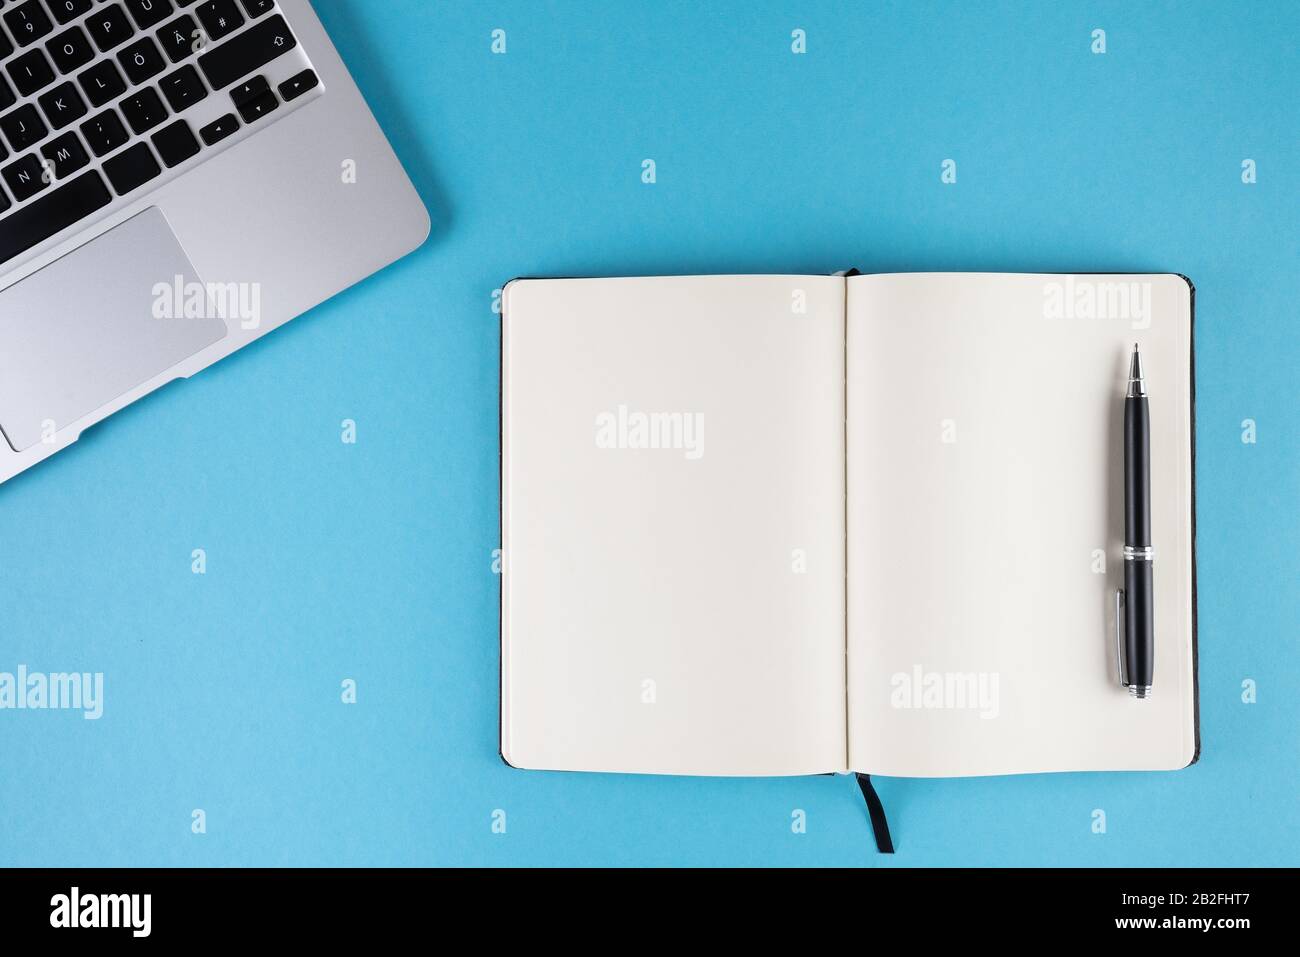 open diary or notebook with blank white pages and laptop computer on blue background template Stock Photo